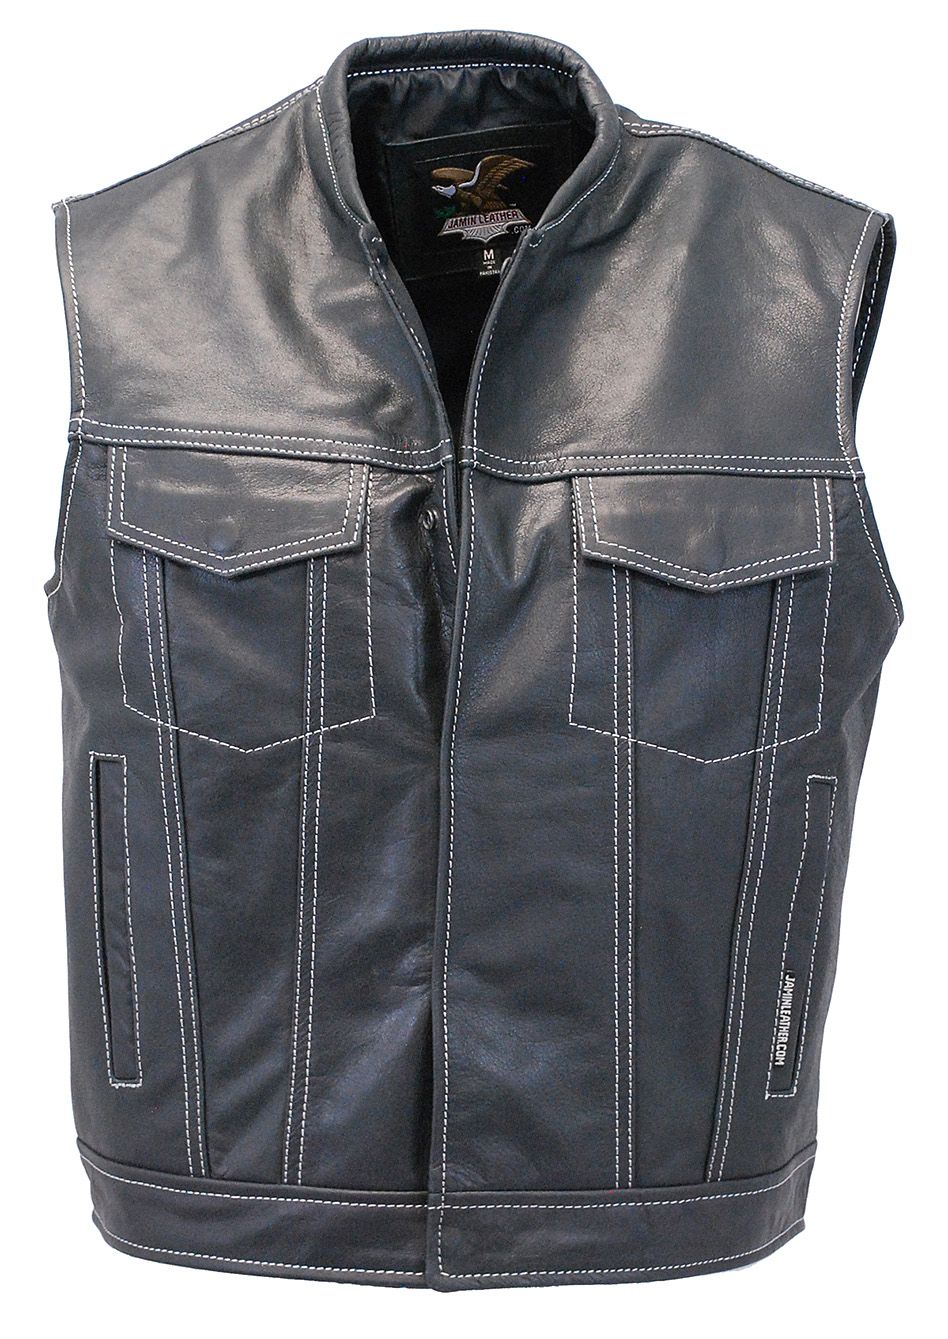 big size vest made of leather with white stitching 